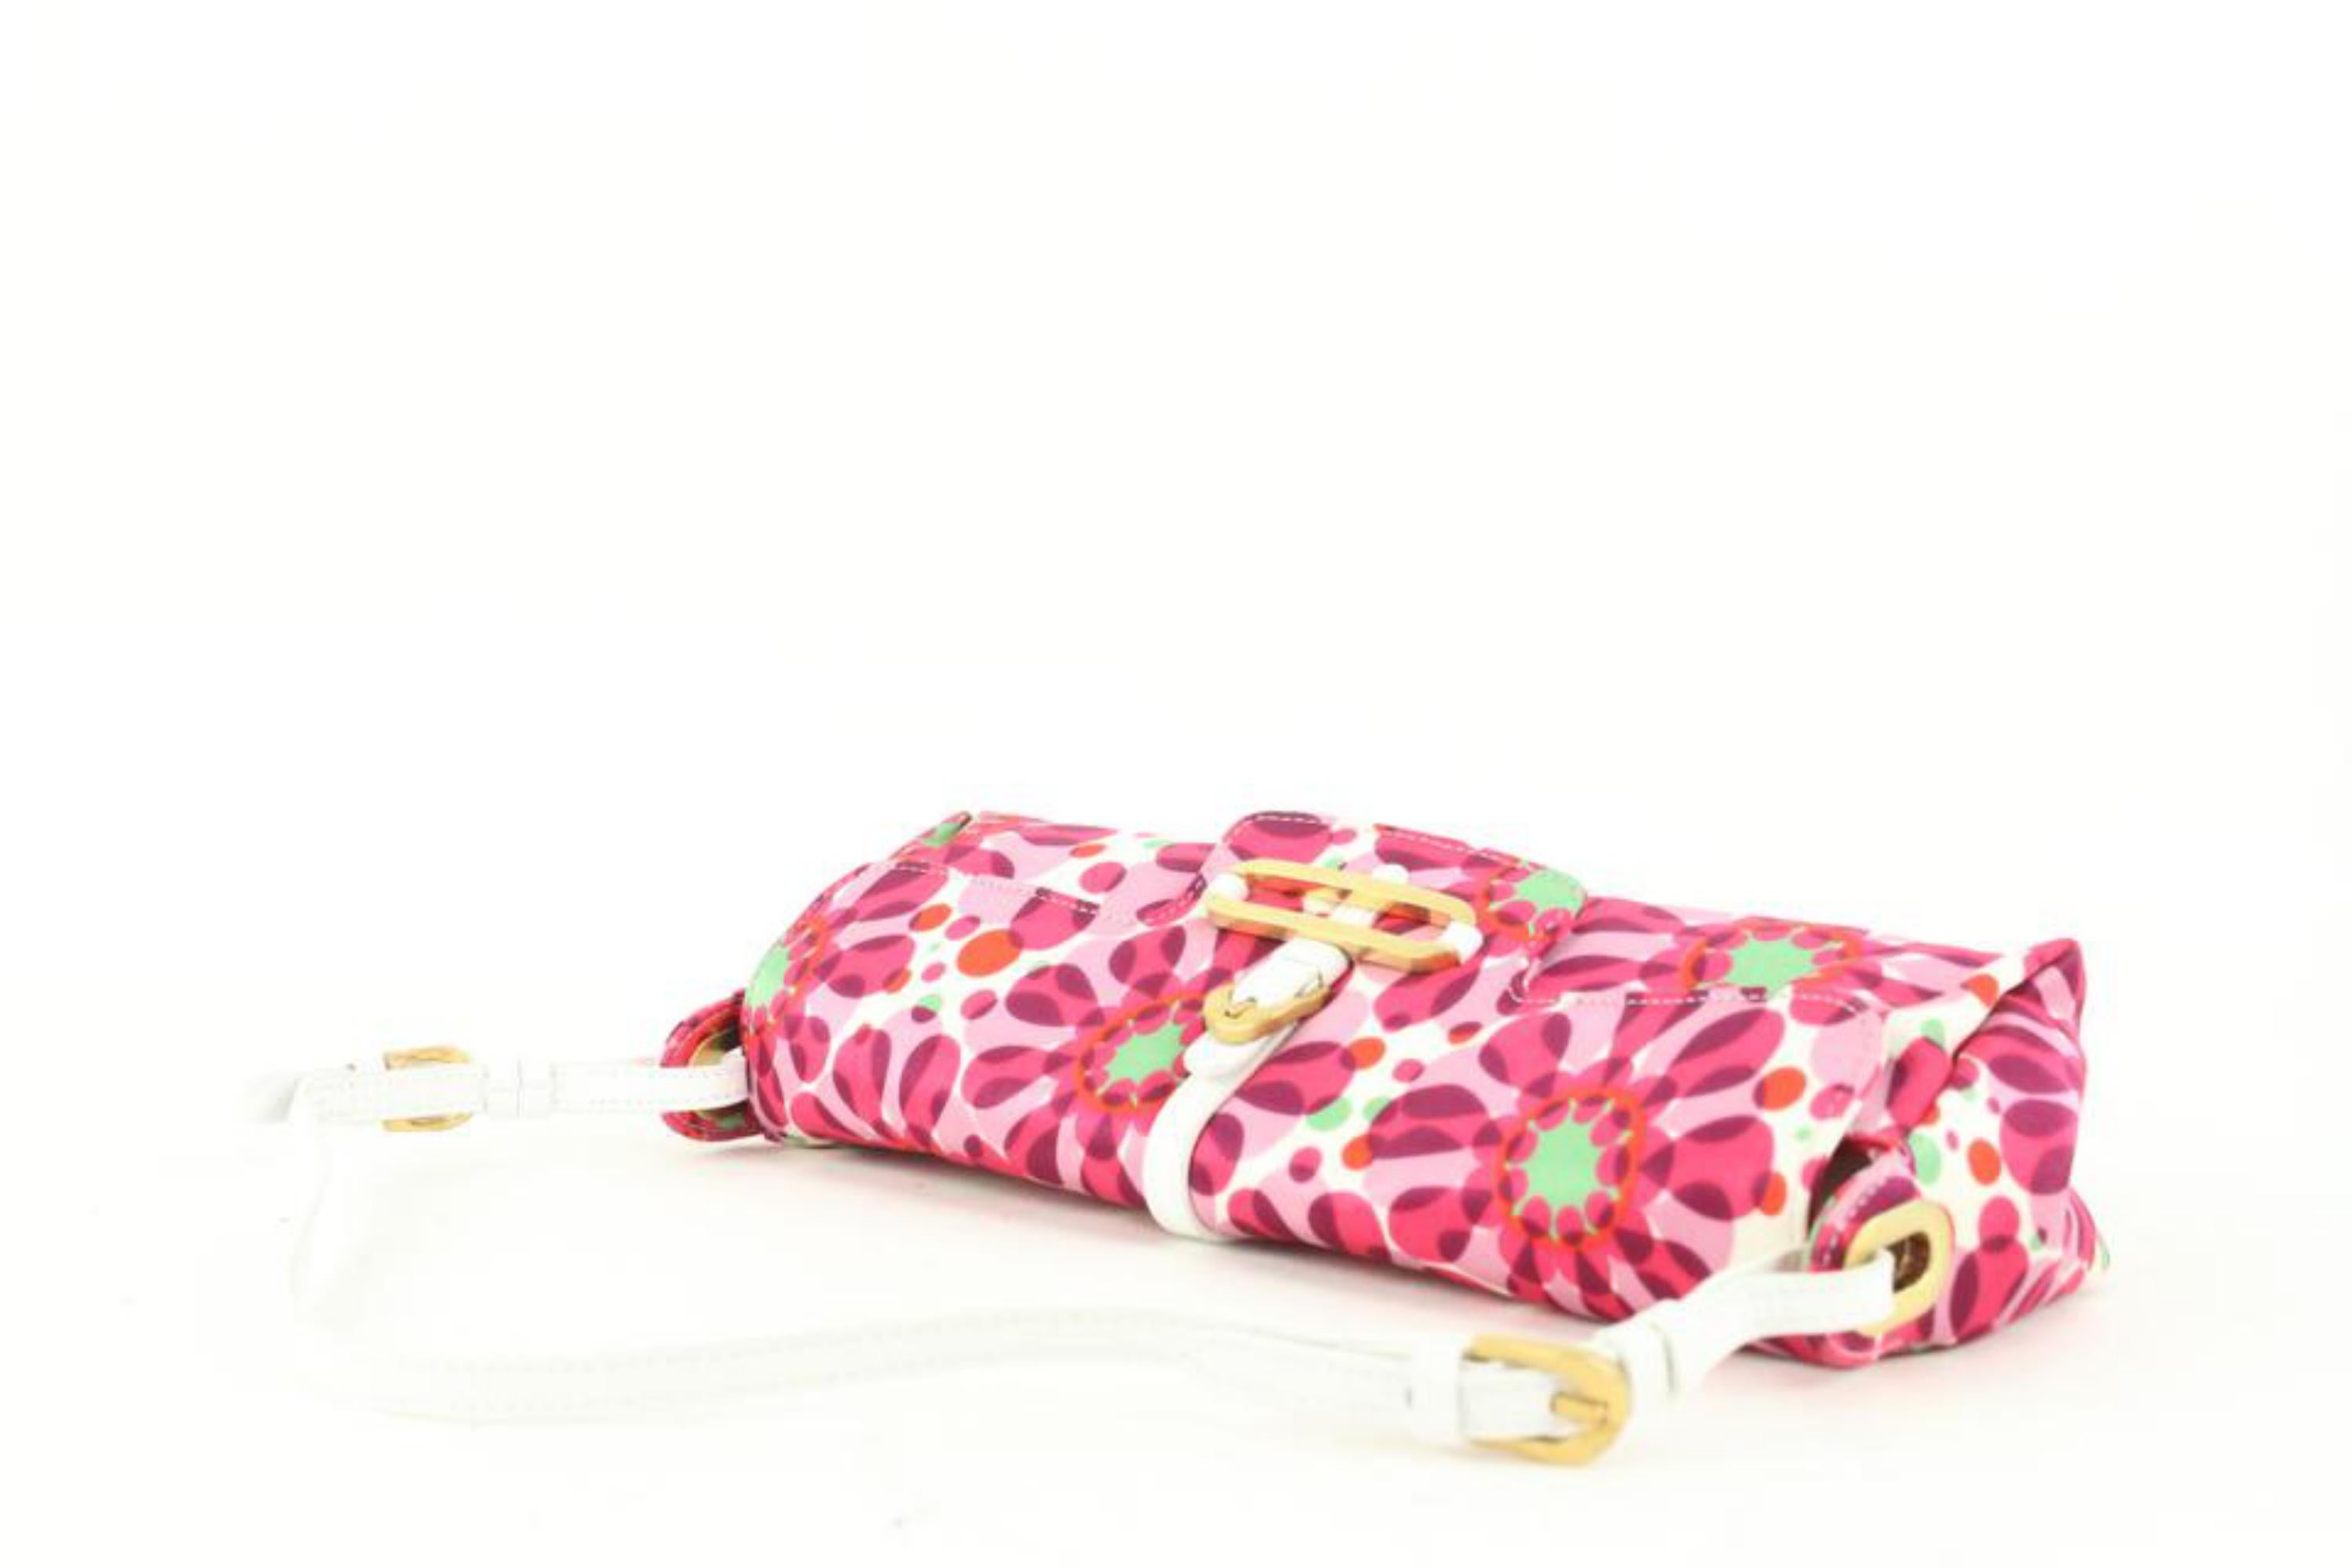 Jimmy Choo Pink Floral Satin Flap Shoulder Bag 2JC113 In Excellent Condition For Sale In Dix hills, NY